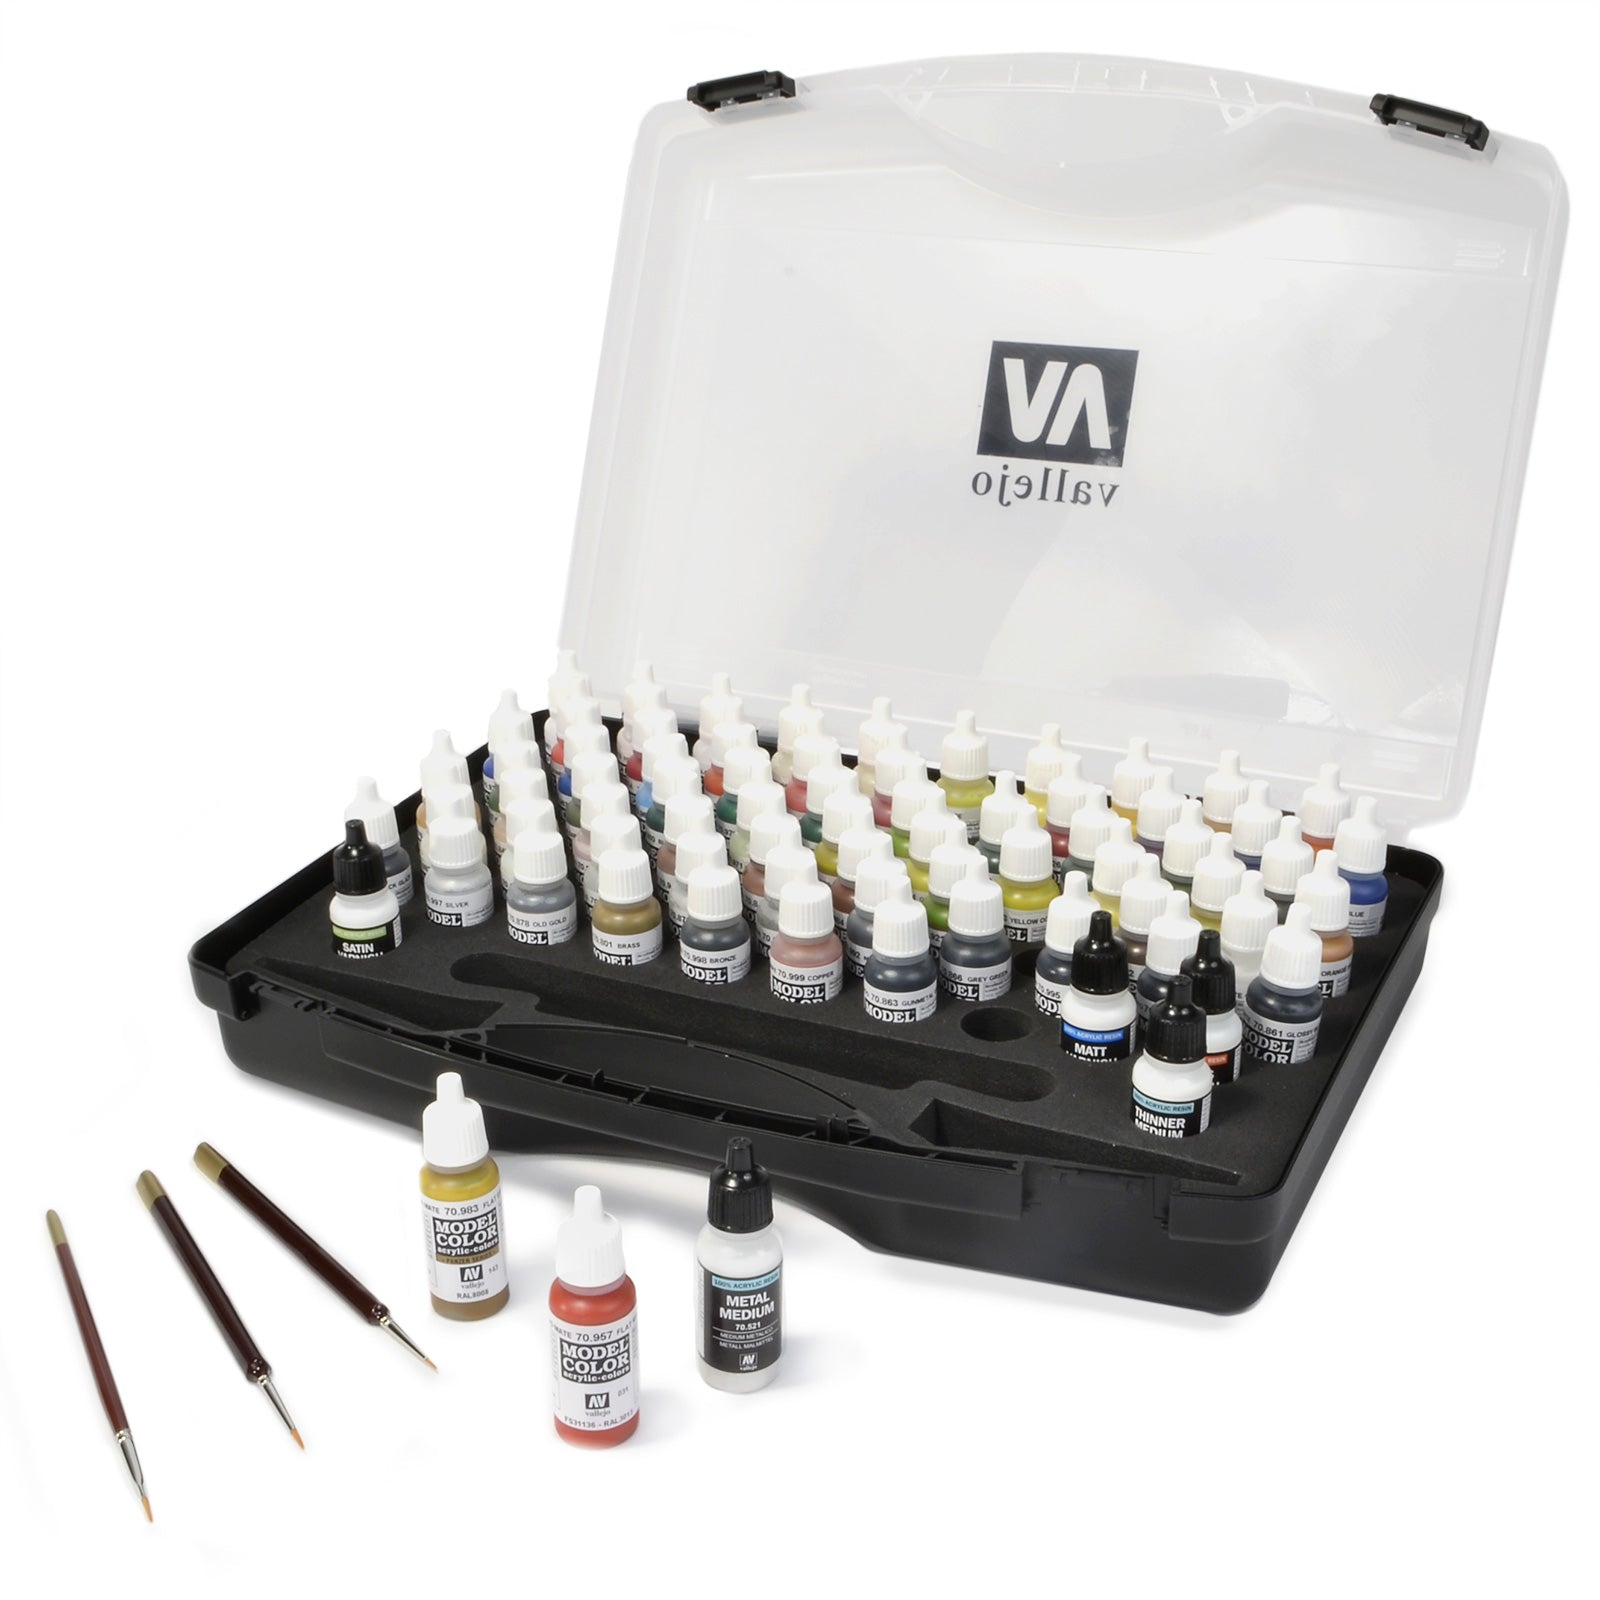 Acrylicos Vallejo Military Colors Model Paint Set, with Case and Brushes, 72 Colors